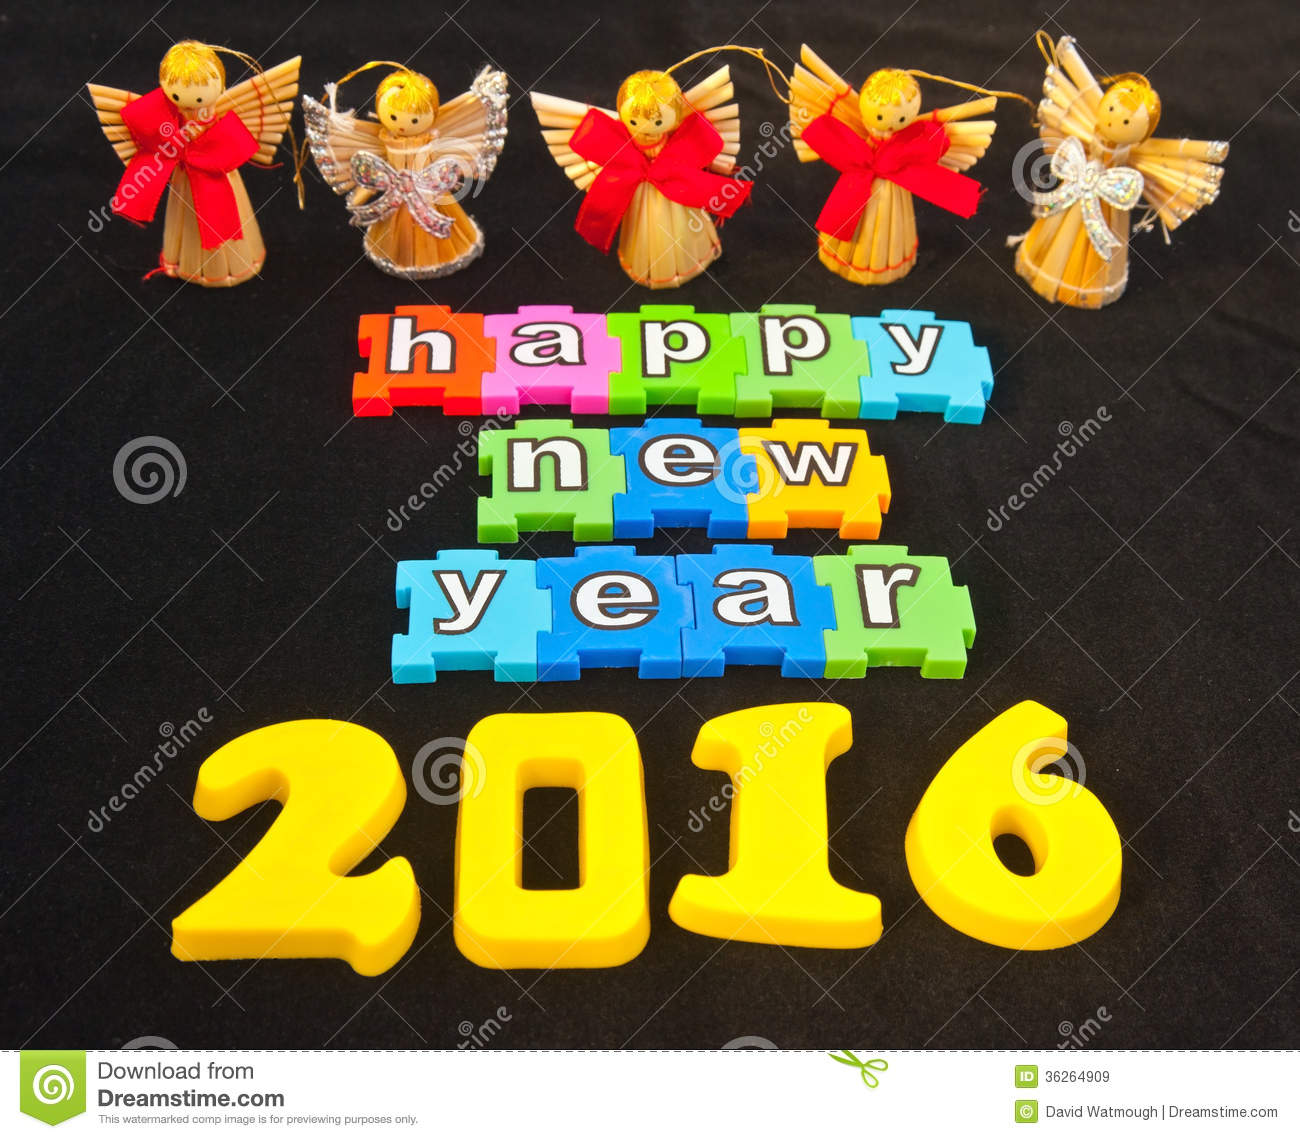 Happy New Year 2016 Isolated On Black Background With Angels Giving A